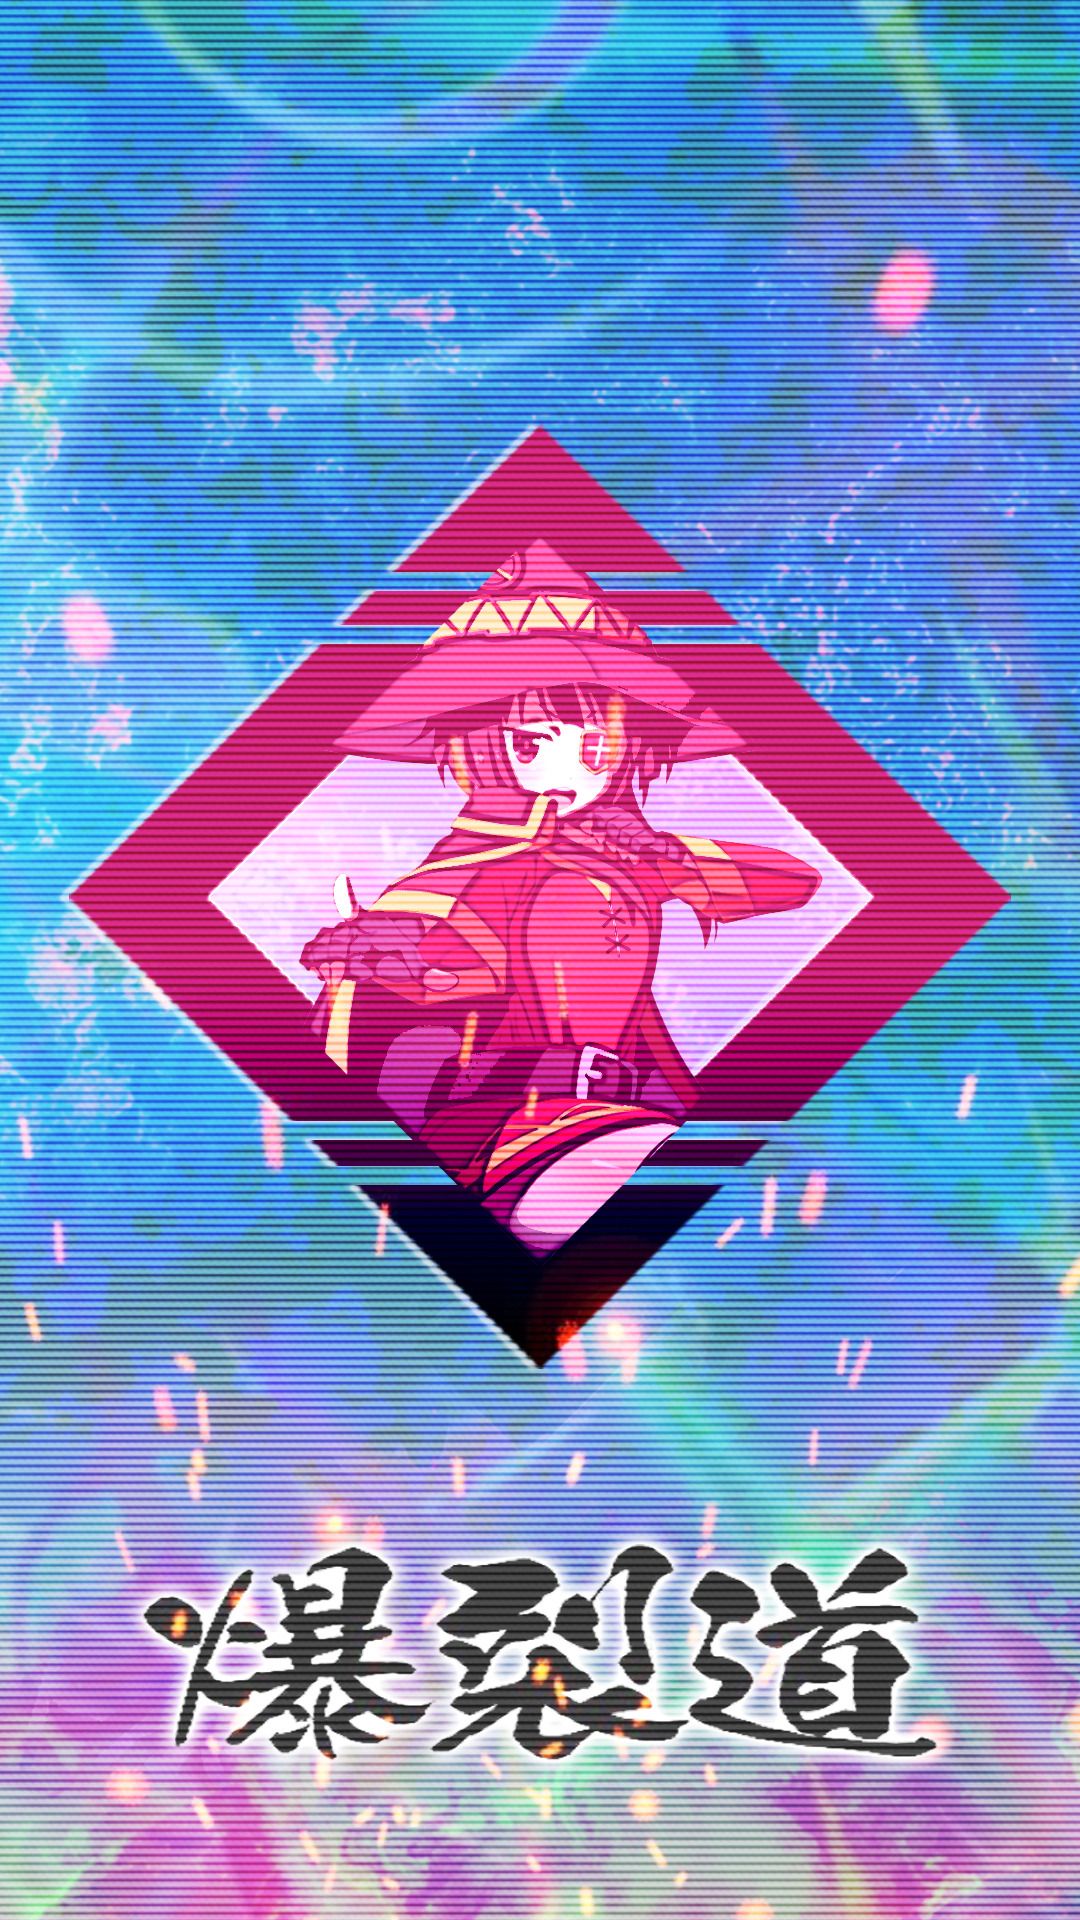 Phone Version Of The Meguwave Wallpaper Since Someone